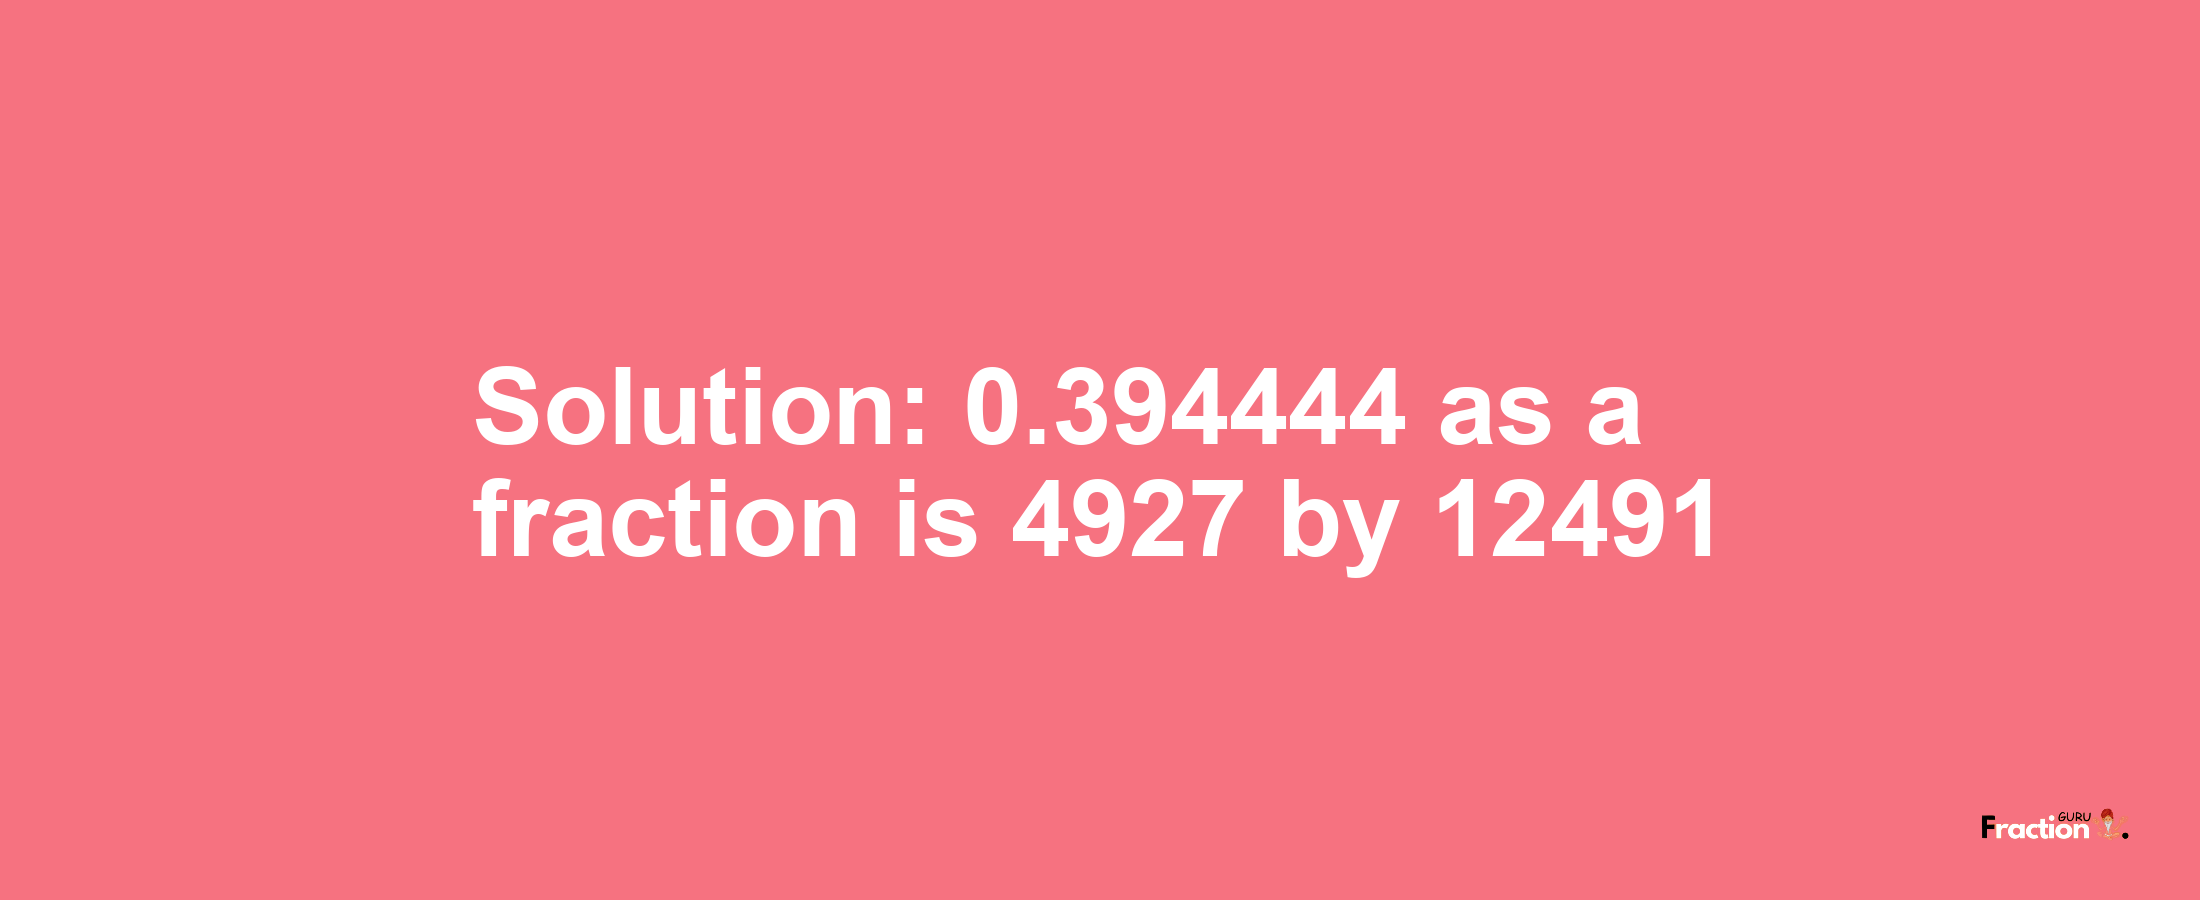 Solution:0.394444 as a fraction is 4927/12491